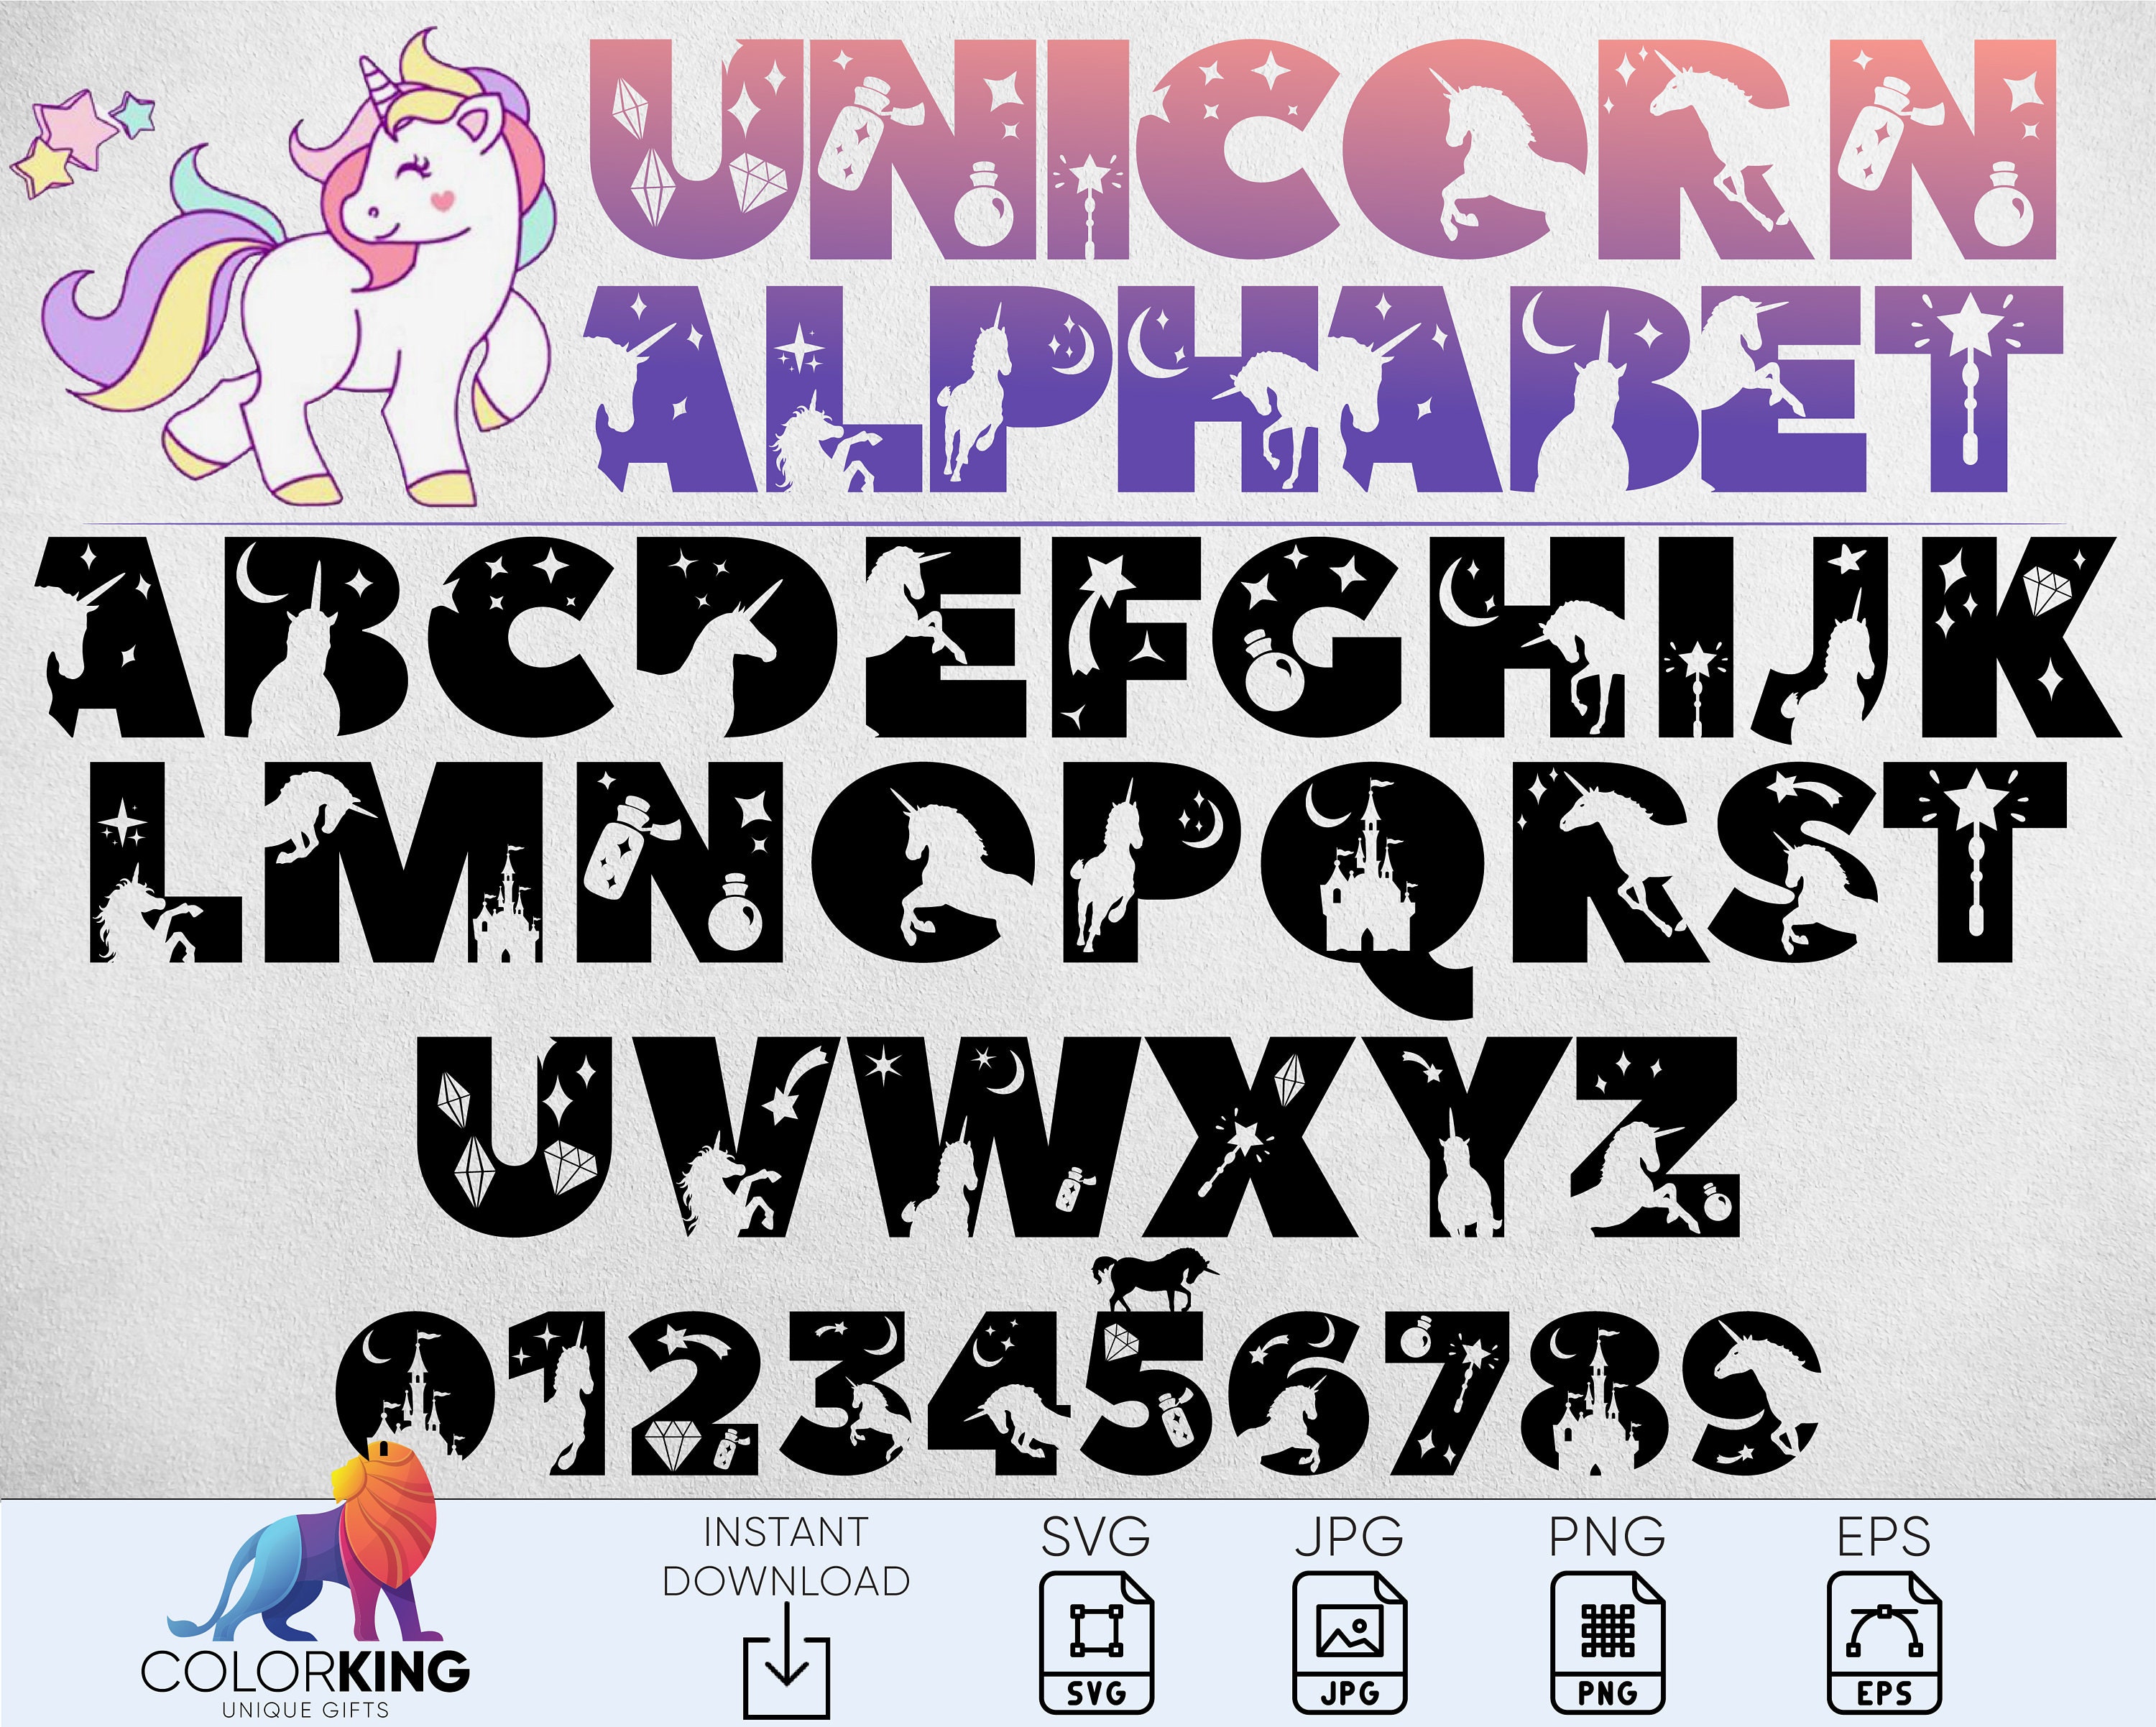  Unicorn Monogram Journal - Letter A: Pink Letter With